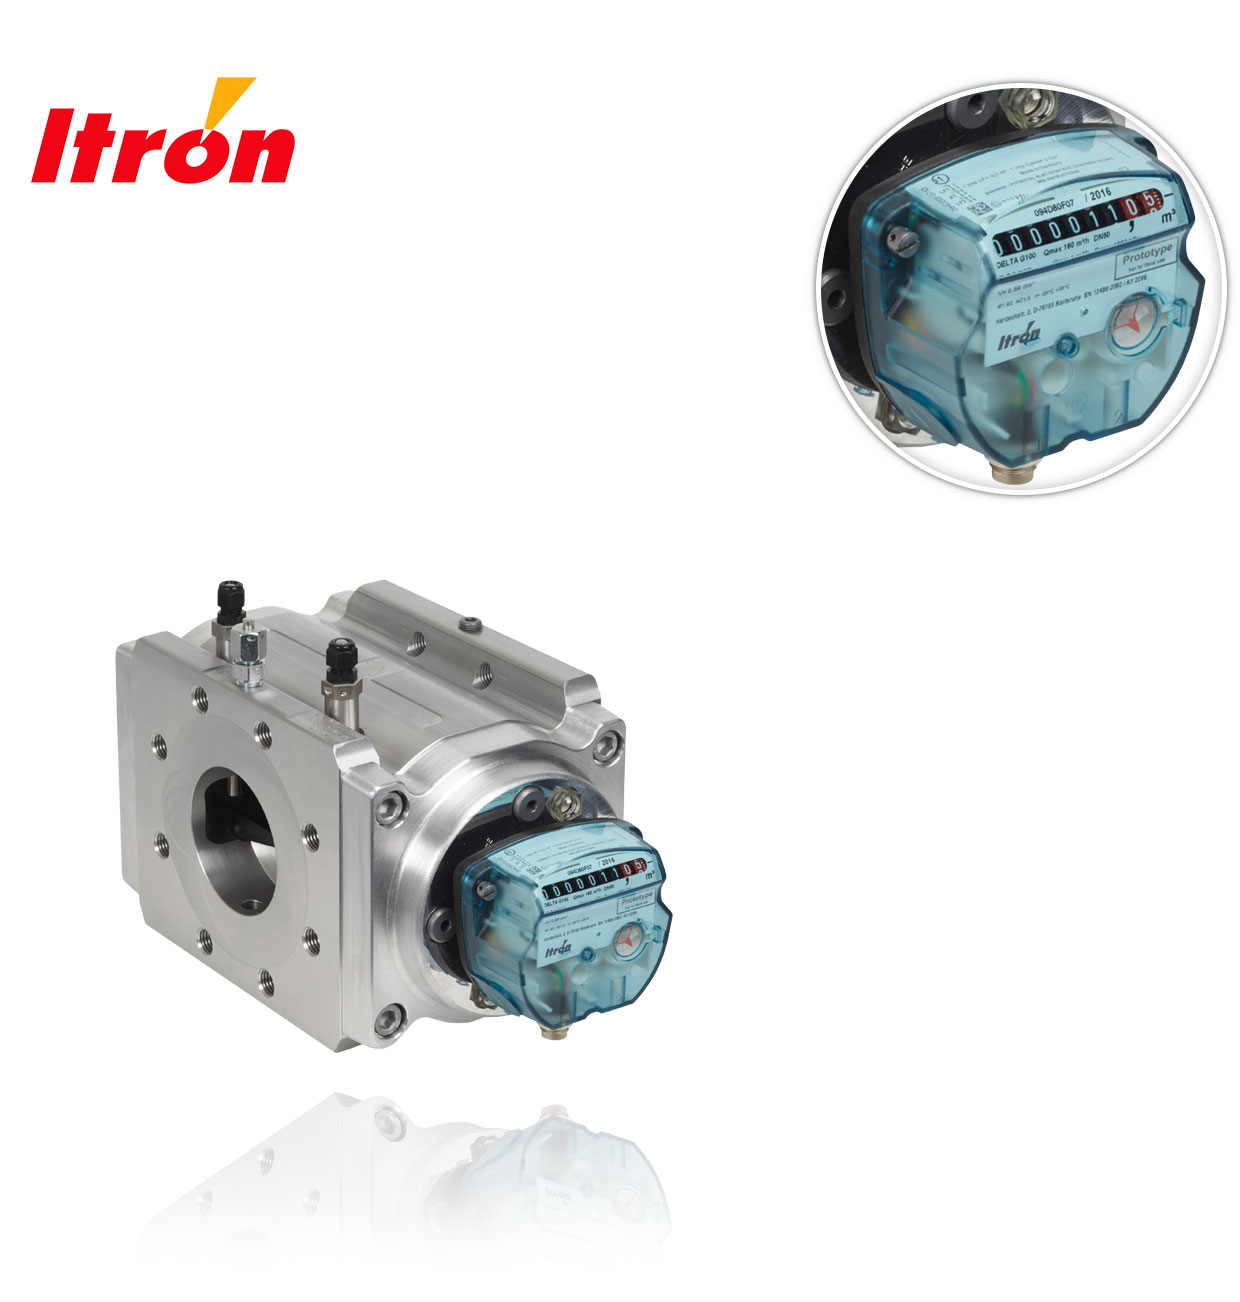 DELTA G100 DN80 maximum qty:160 DYNAMIC:50 LENGTH:171mm ITRON EXTENDED DYNAMIC ROTARY PISTON METER